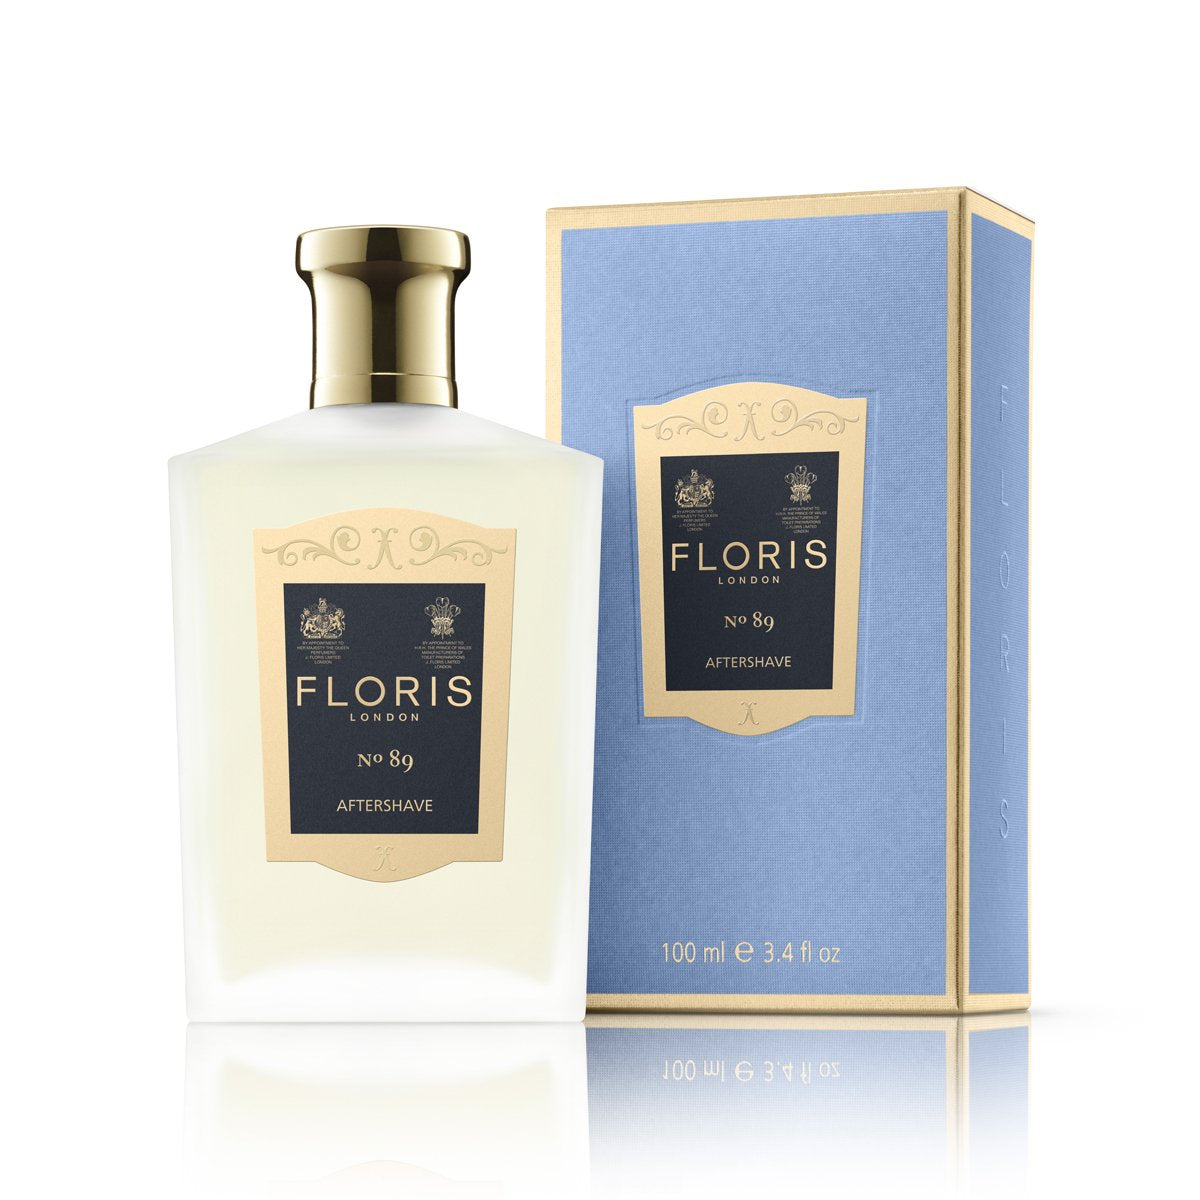 No 89 by Floris of London